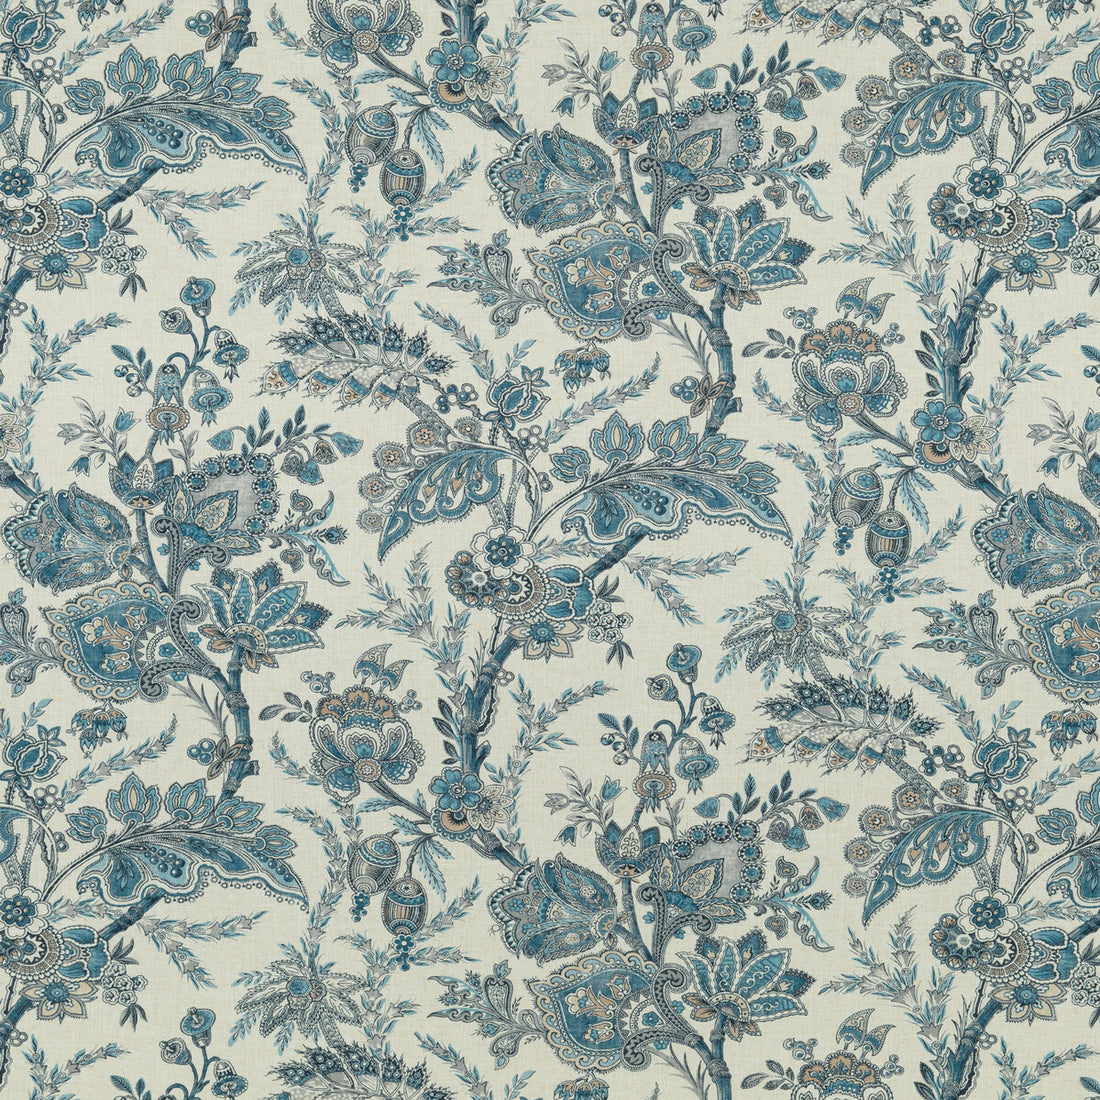 Jewel Indienne fabric in blue/sand color - pattern BP10830.2.0 - by G P &amp; J Baker in the Coromandel collection